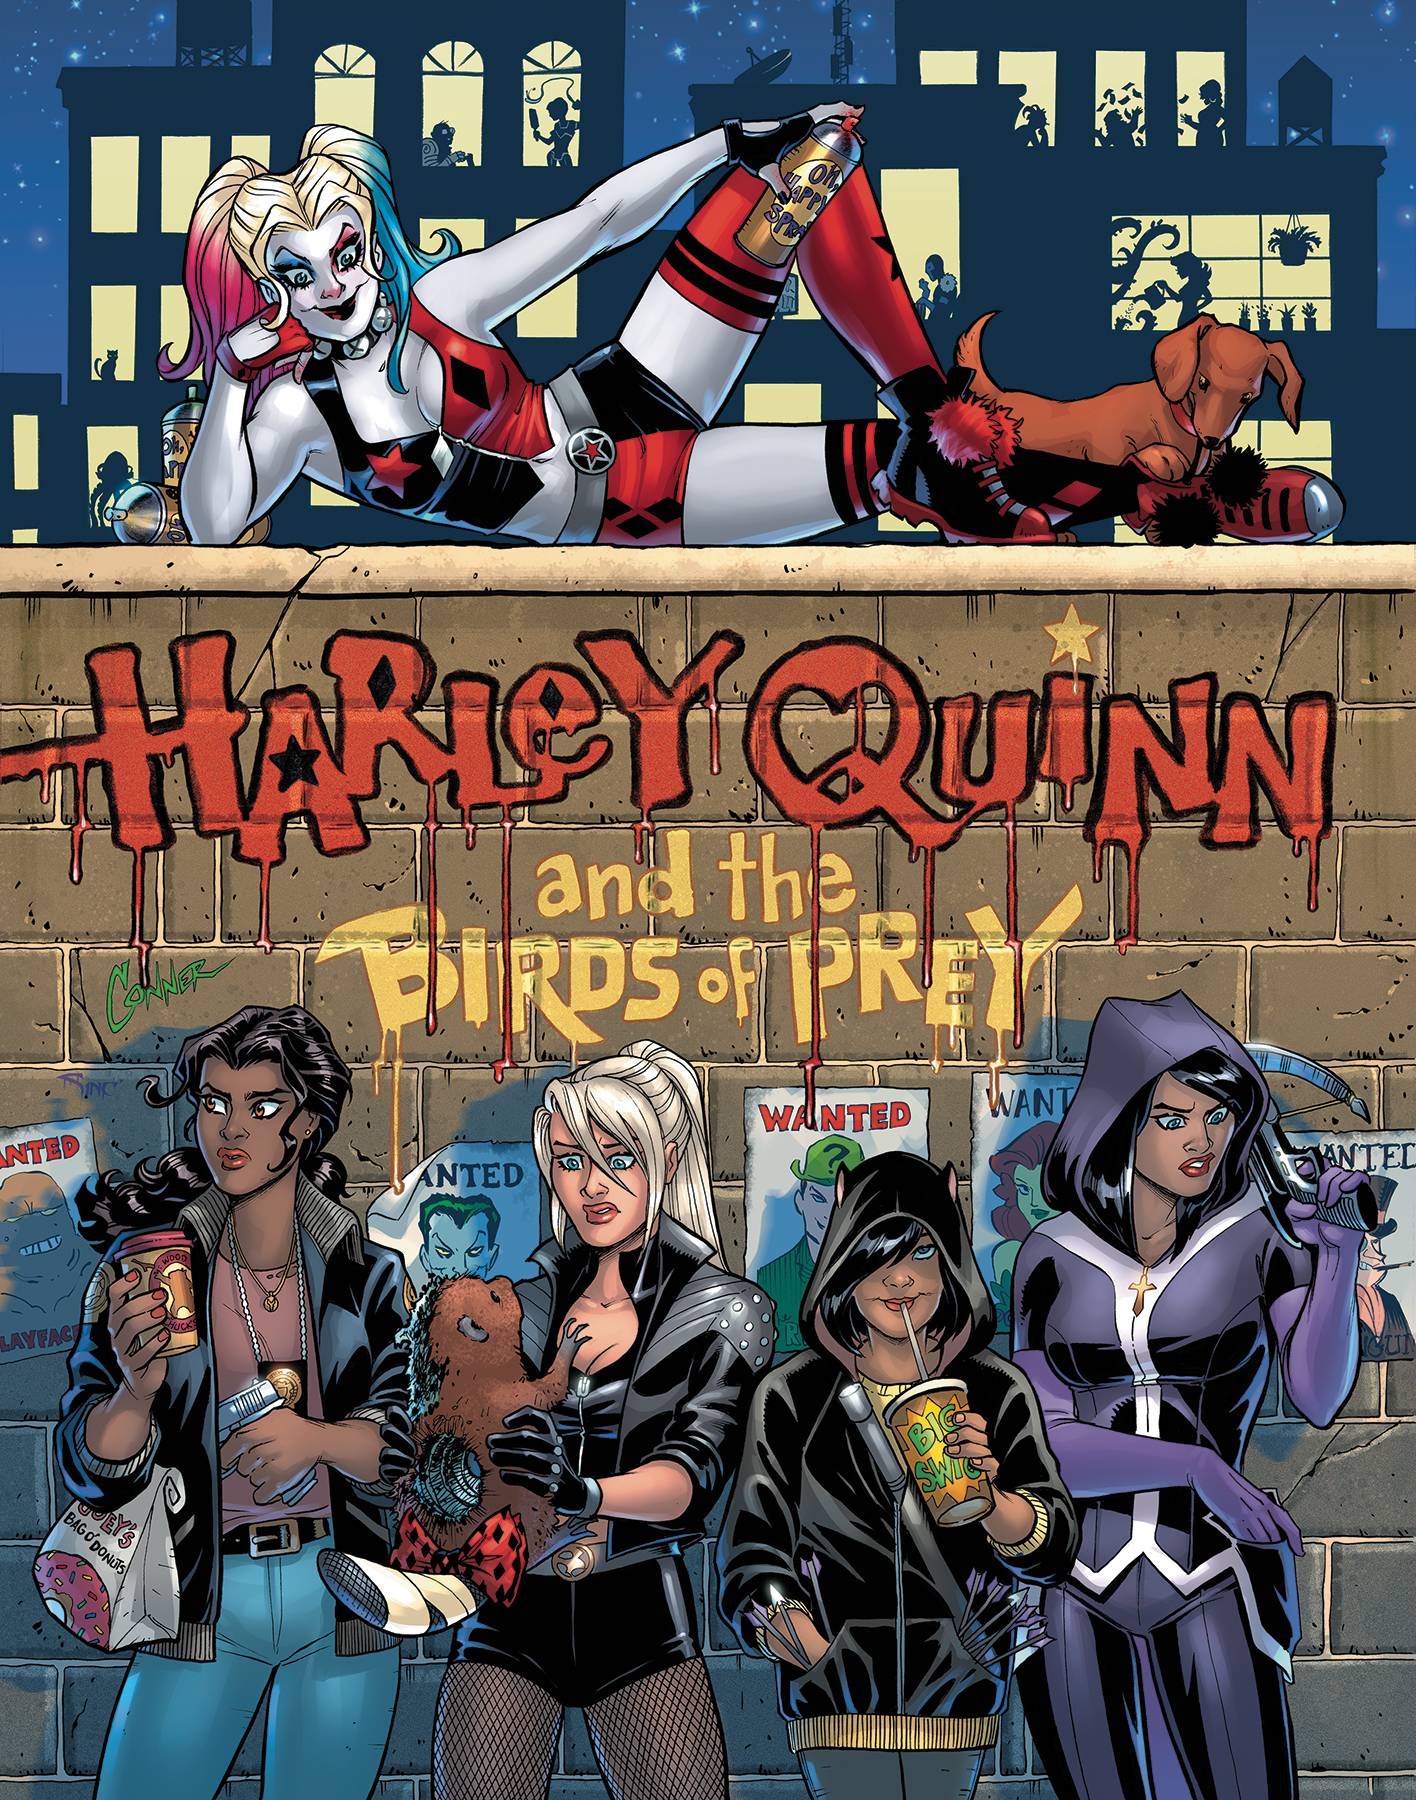 HARLEY QUINN AND THE BIRDS OF PREY #1 (OF 4) 02/12/20 FOC 01/13/20